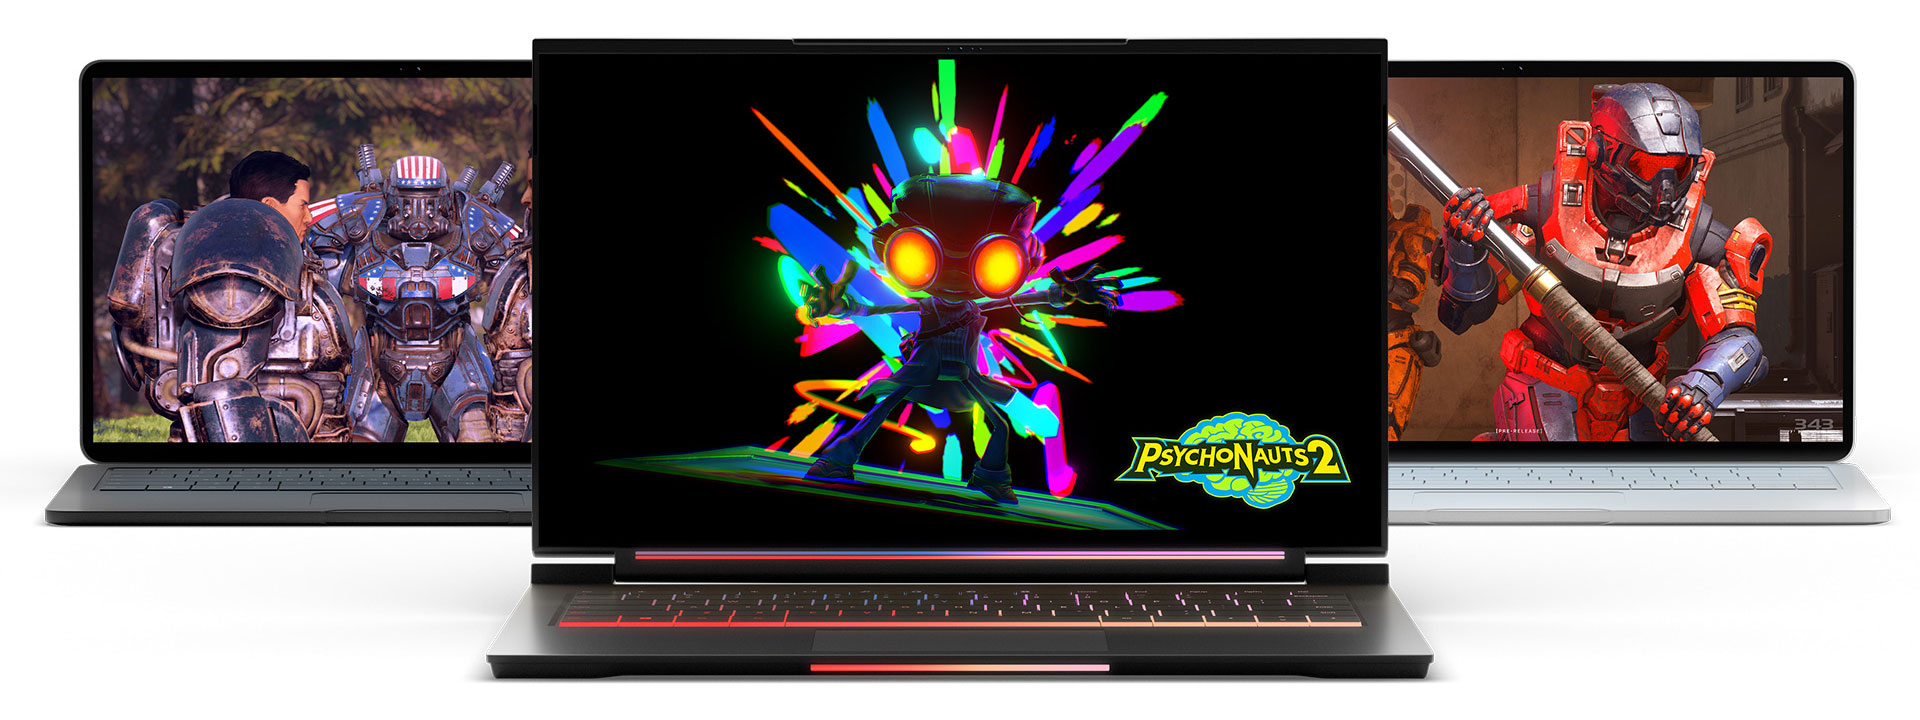 3 laptop screens showing video games